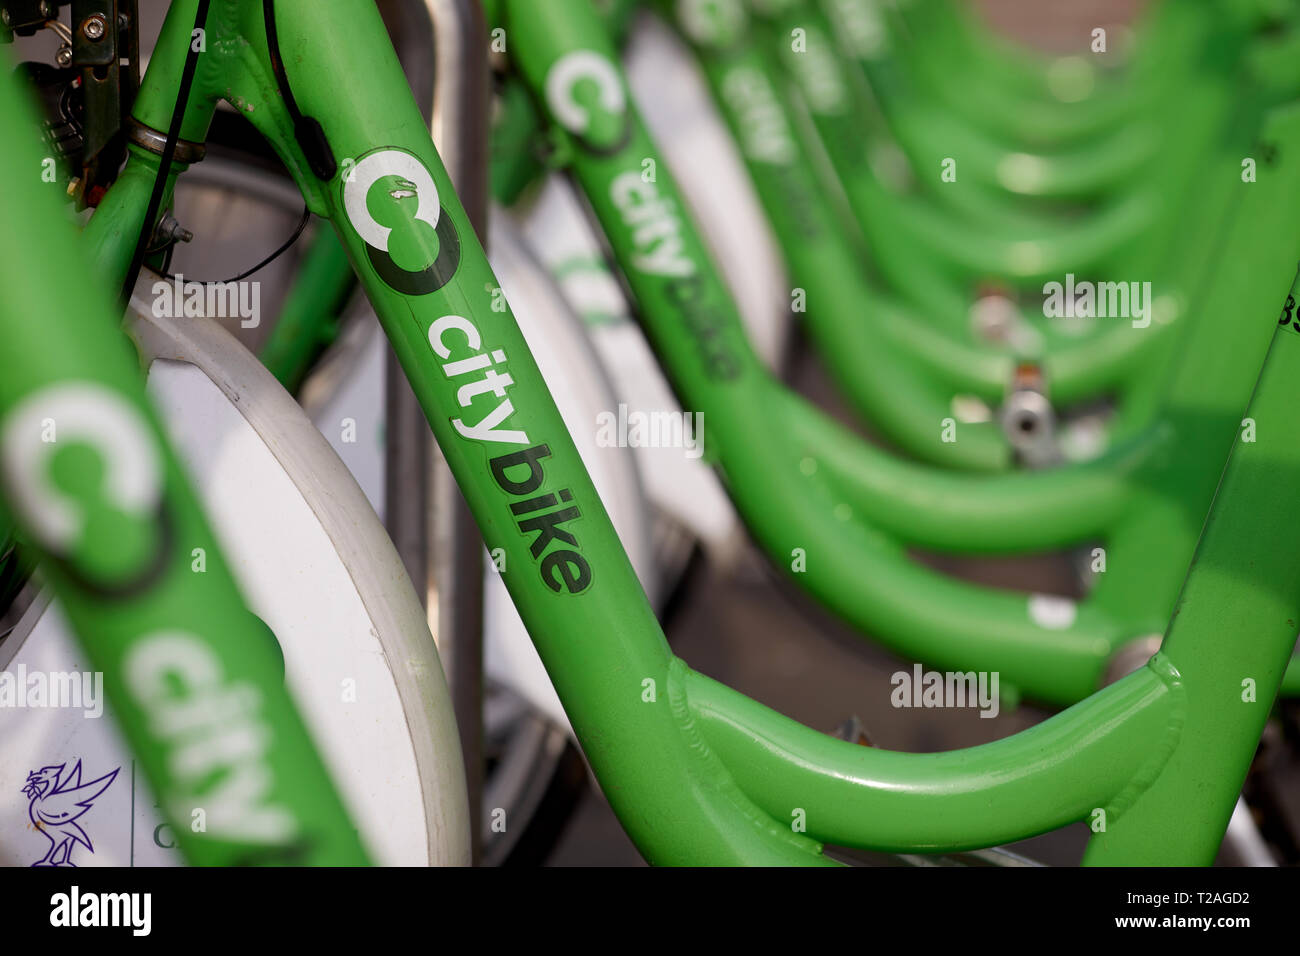 Liverpool's citybike cycle hire scheme stored in a pavement docking station hub Stock Photo